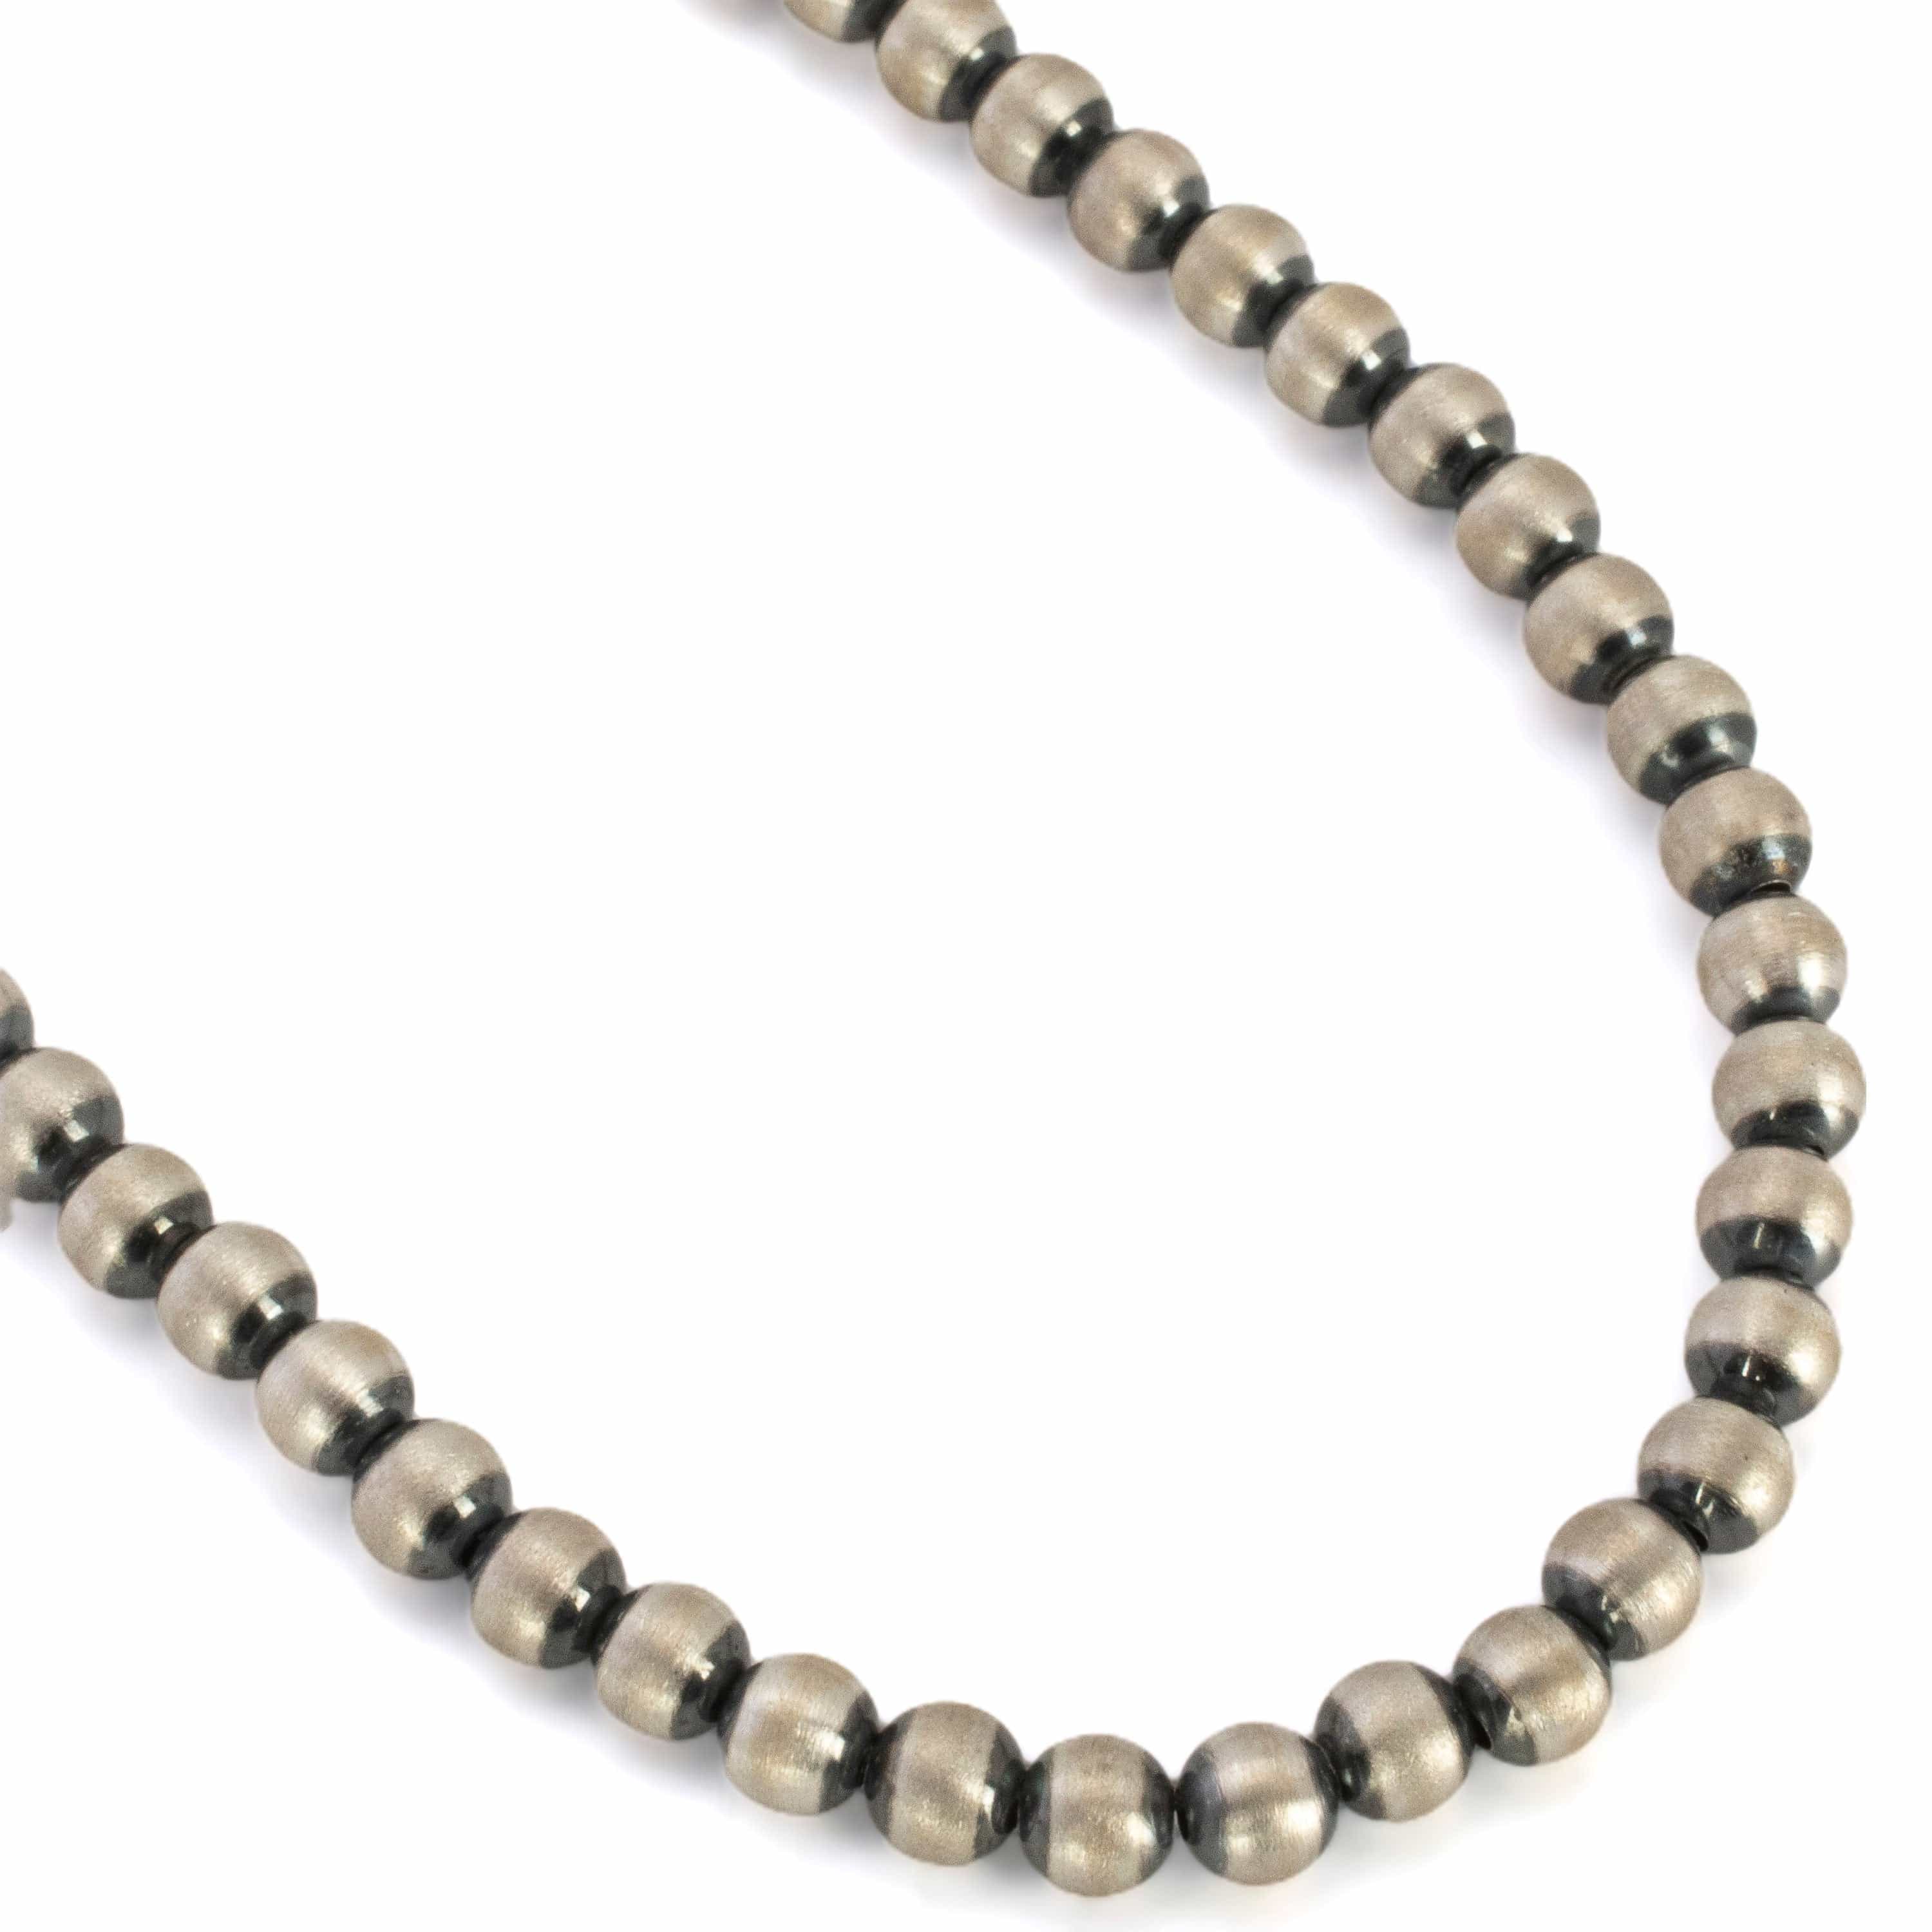 Kalifano Native American Jewelry 16" Single Strand 4mm Navajo Pearl USA Native American Made 925 Sterling Silver Necklace with 2" extender chain NAN400.013